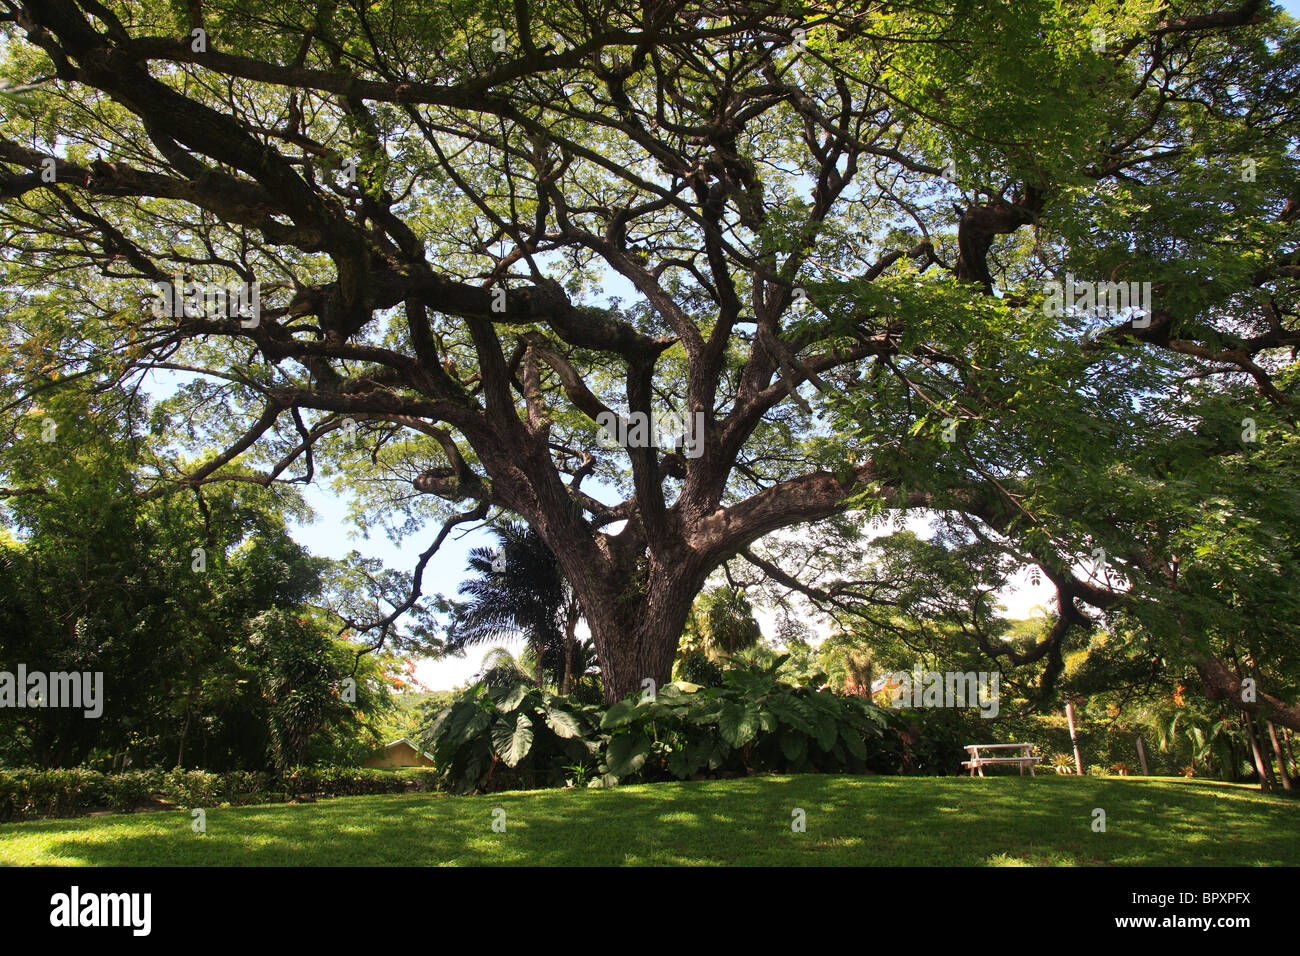 Giant 350 year old Saman Tree at the Tropical Gardens at Romney Manor in St.Kitts Stock Photo